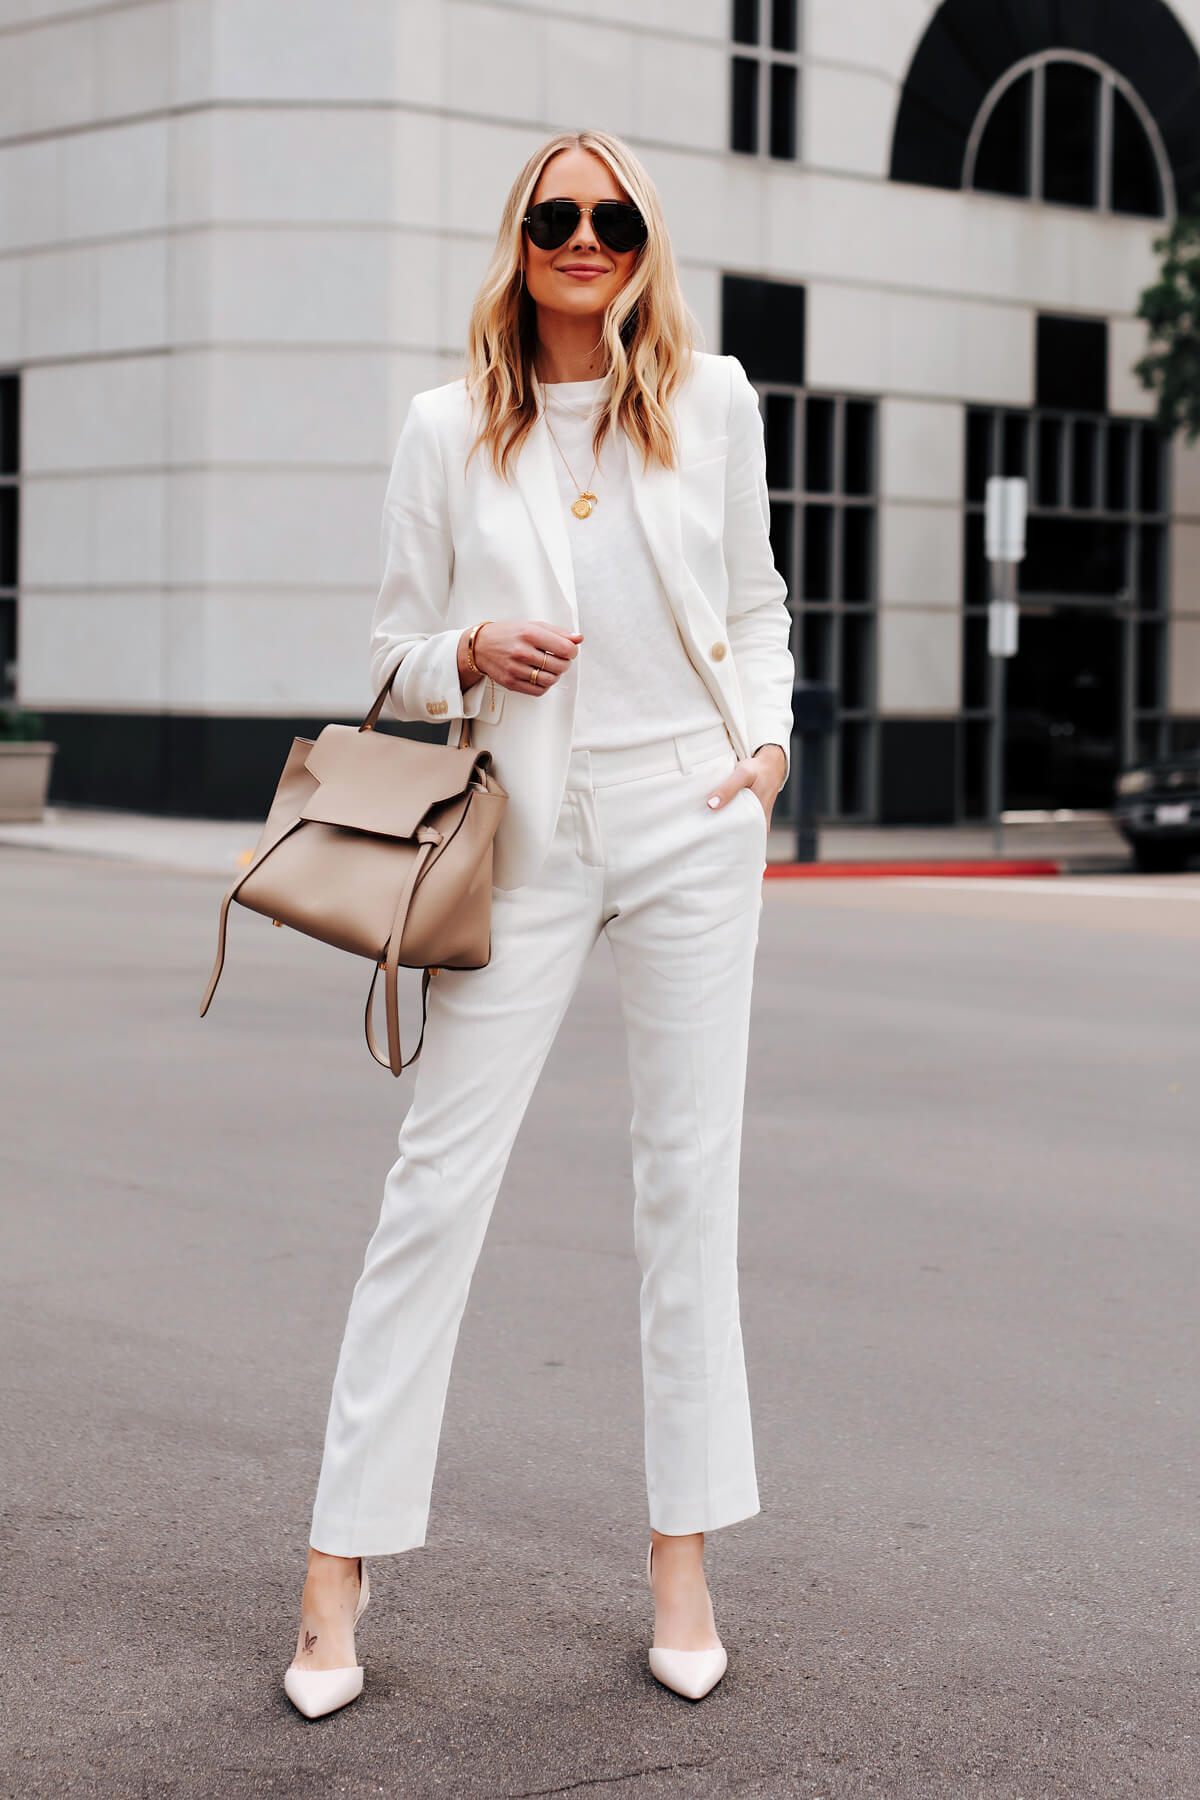 Fashionable woman wearing trendy outfit with yellow sunglasses, leather  backpack, pink blazer, wide leg white trousers, walking in street of city.  Full-length outdoor portrait Photos | Adobe Stock